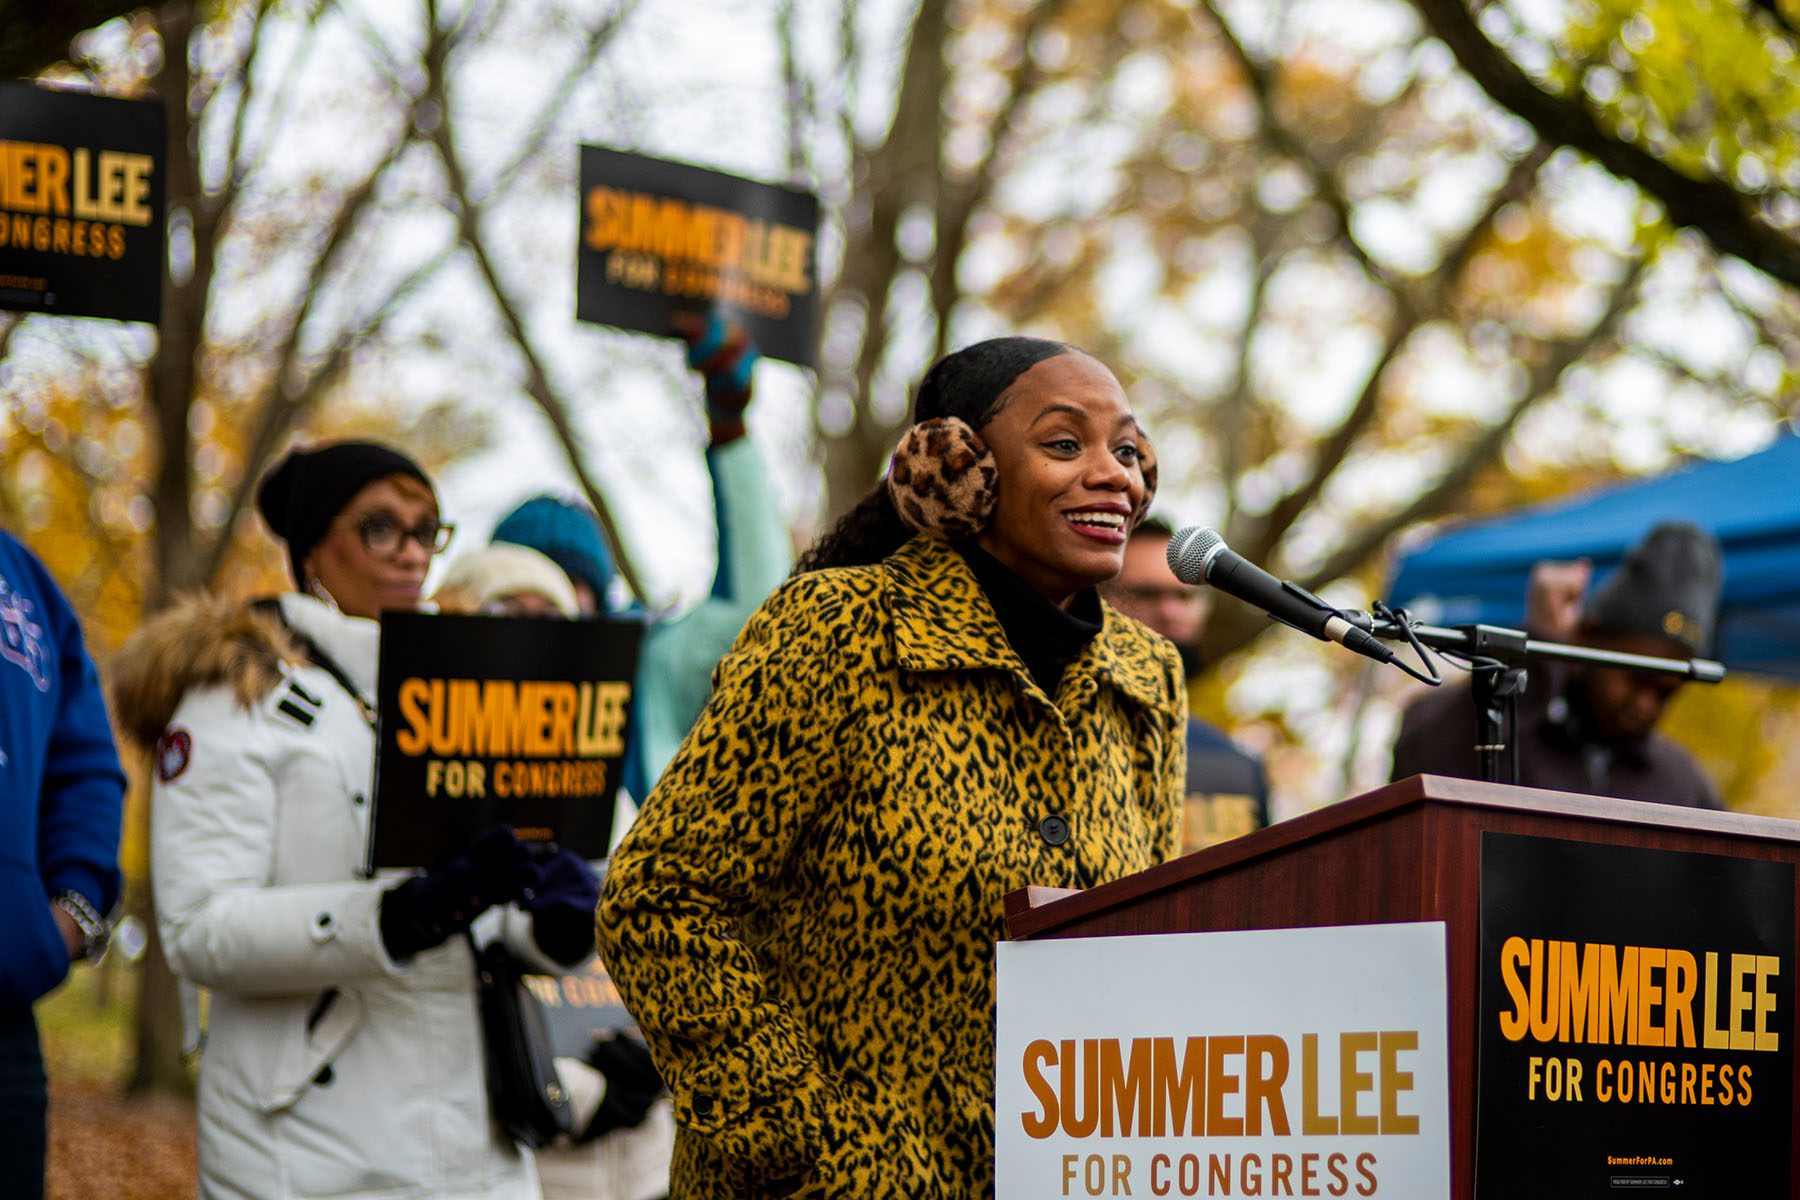 Summer Lee is seen smiling at a podium as people hold signs that read "Summer Lee For Congress"